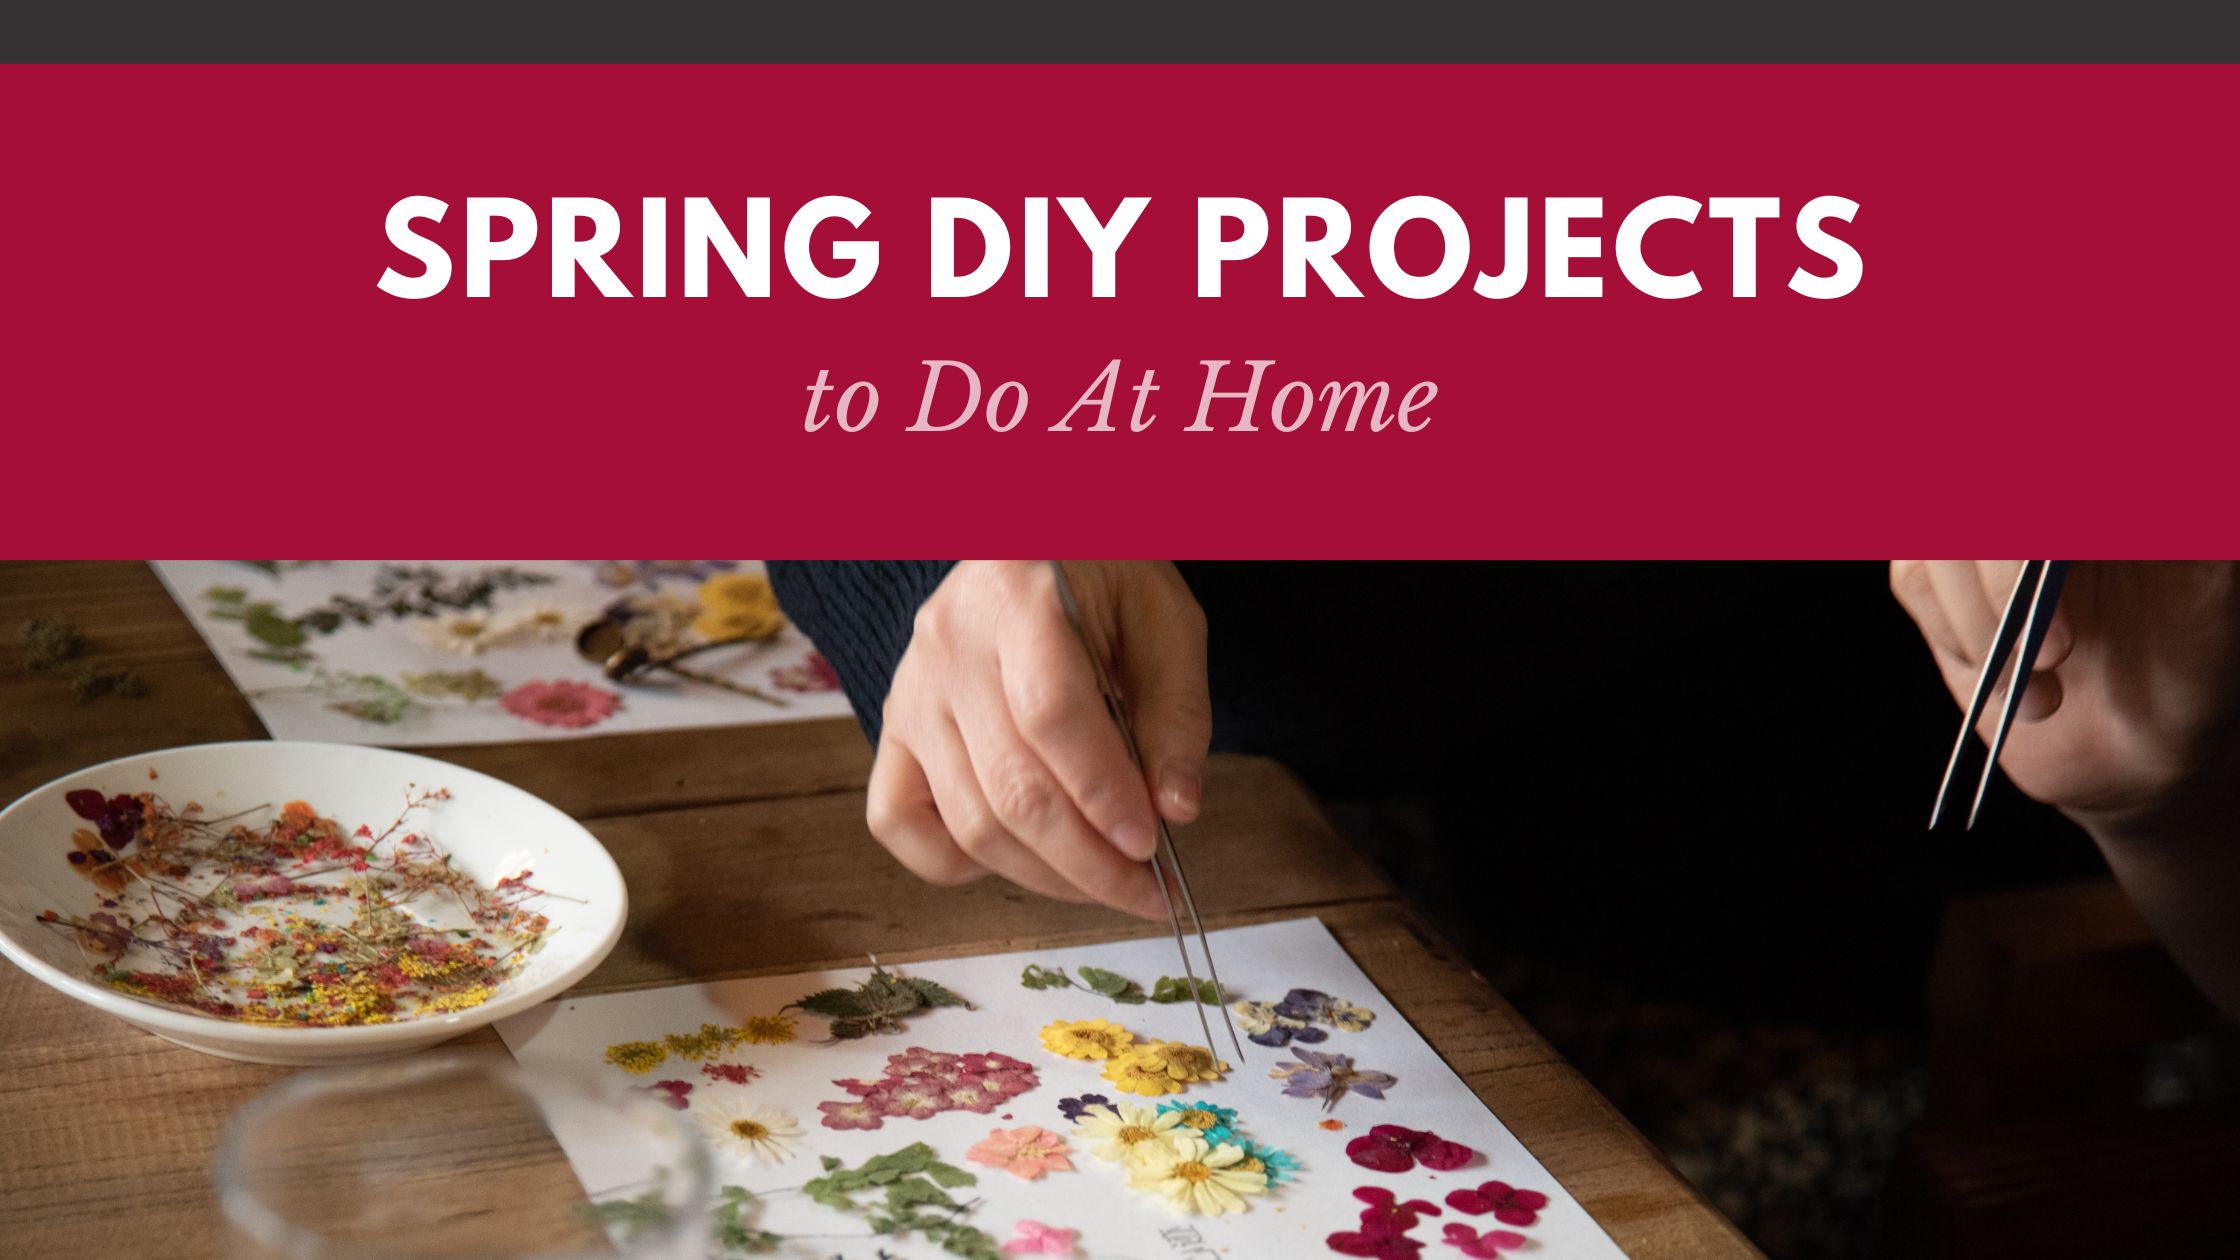 Spring DIY Projects to Do At Home